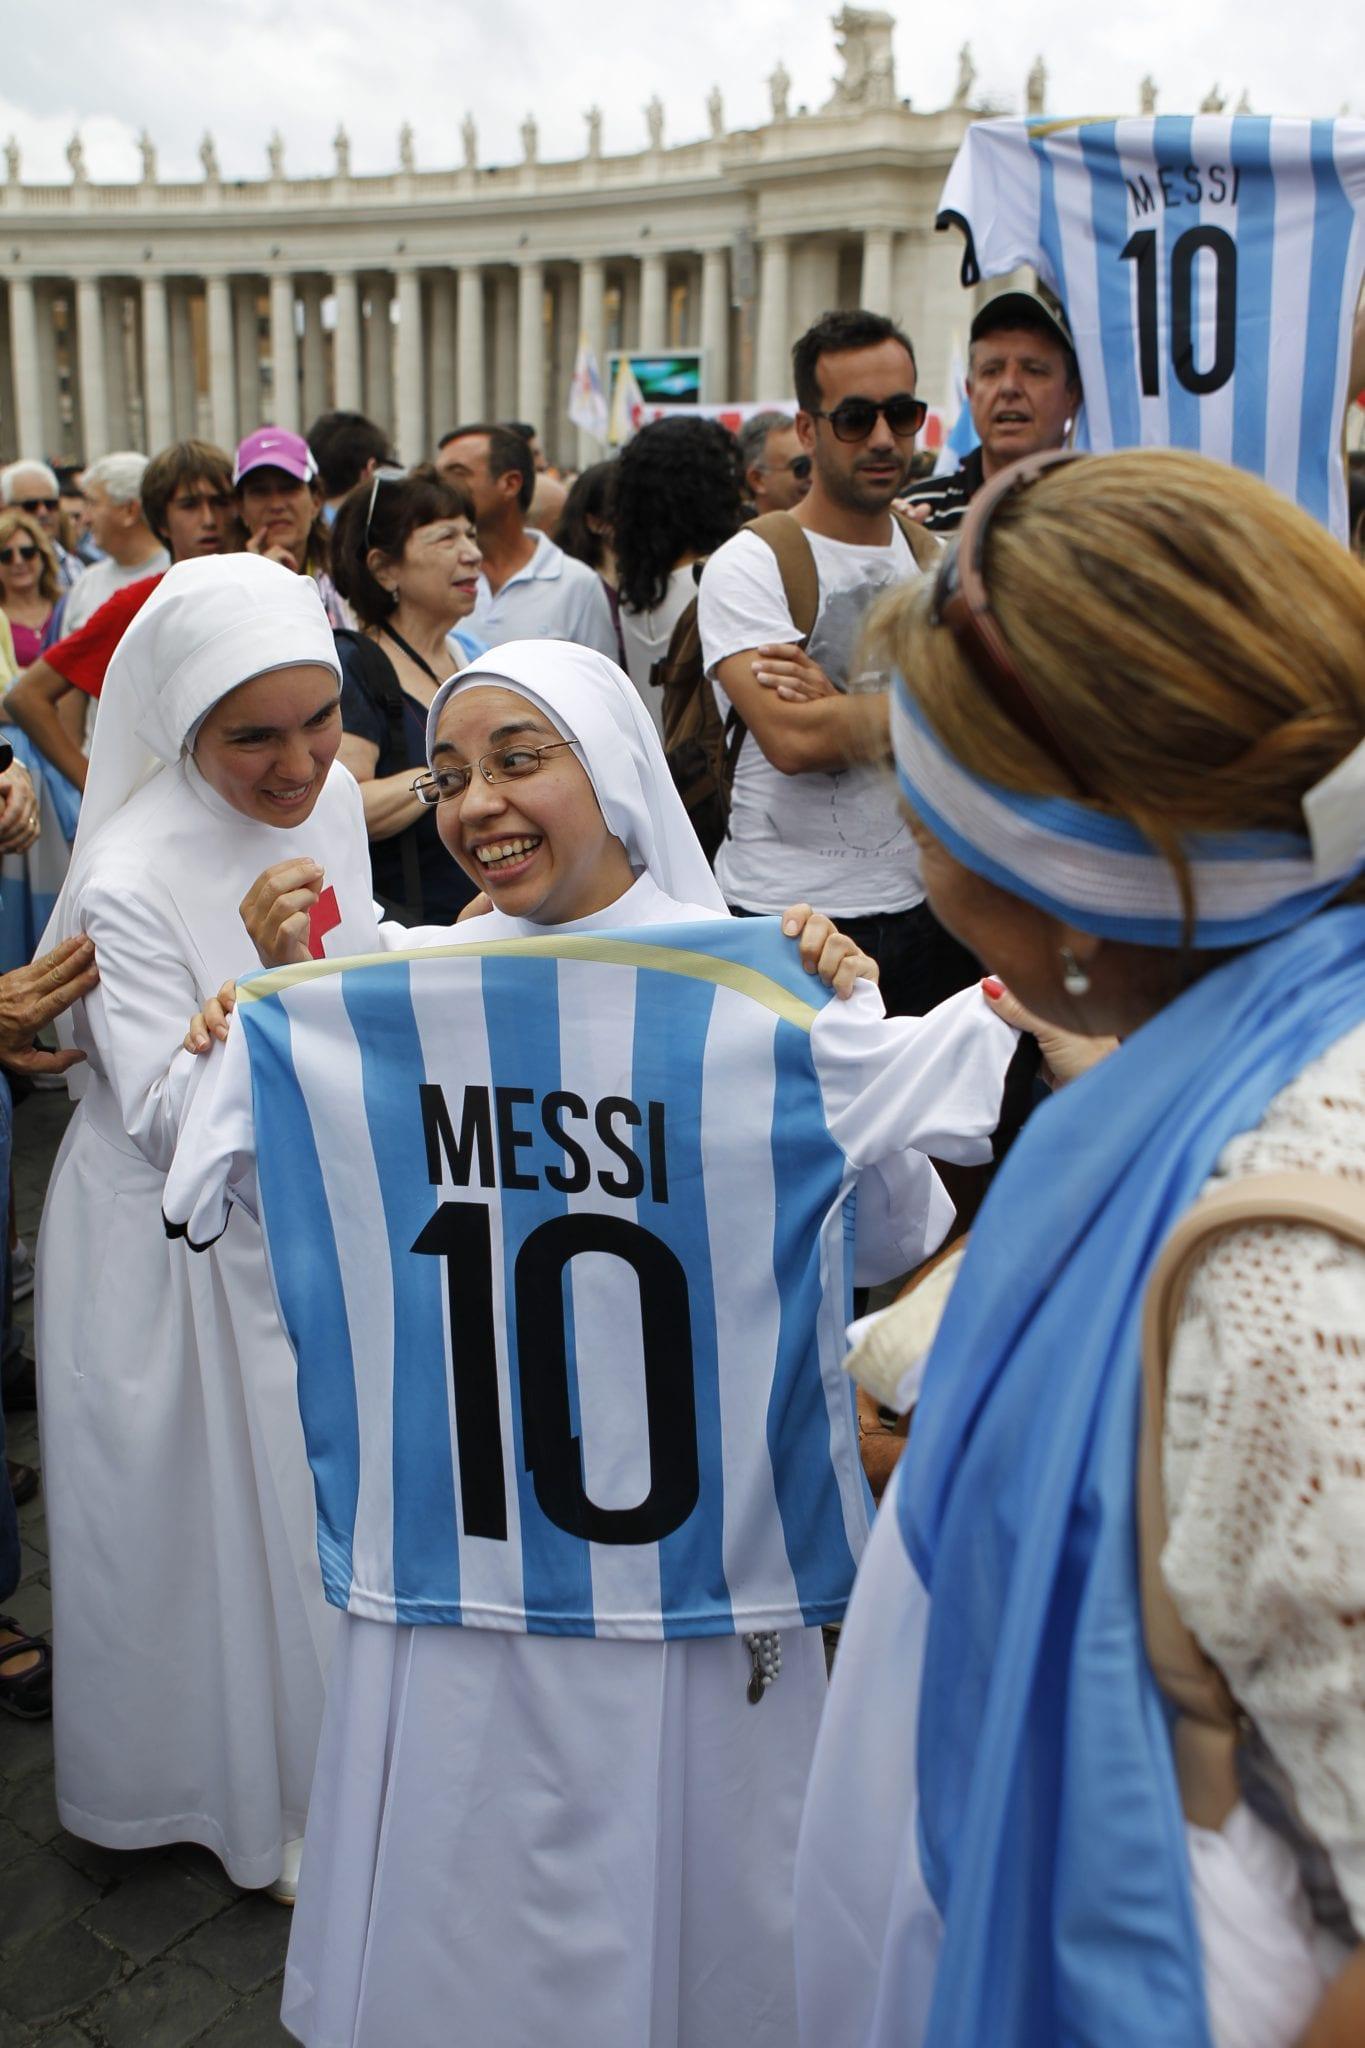 At 2018 World Cup, will Argentina break ‘Curse of the Madonna’?